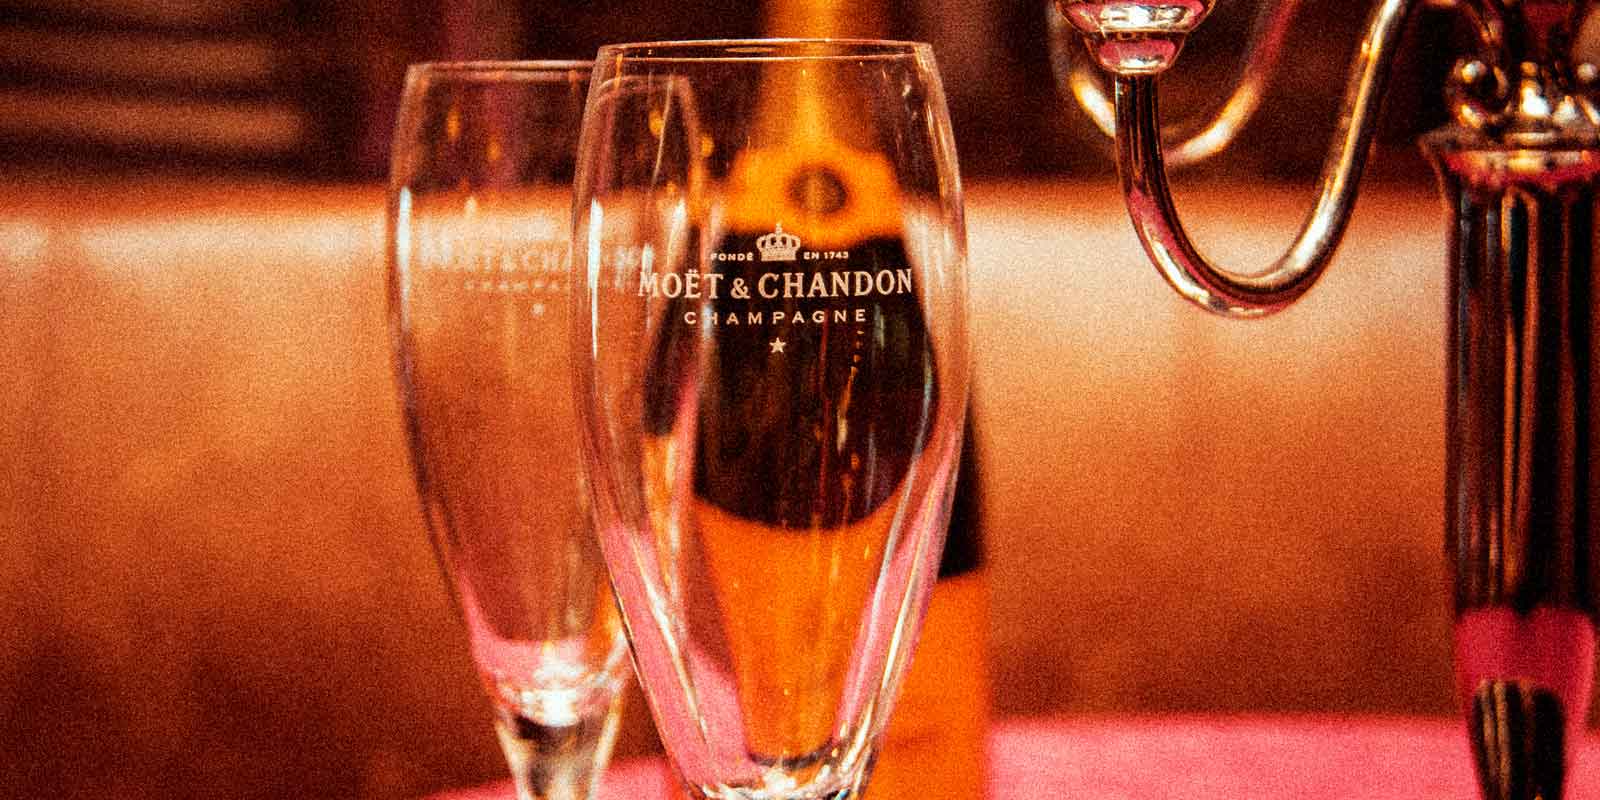 Closeup of 2 champagne glasses with the Moët & Chandon label.